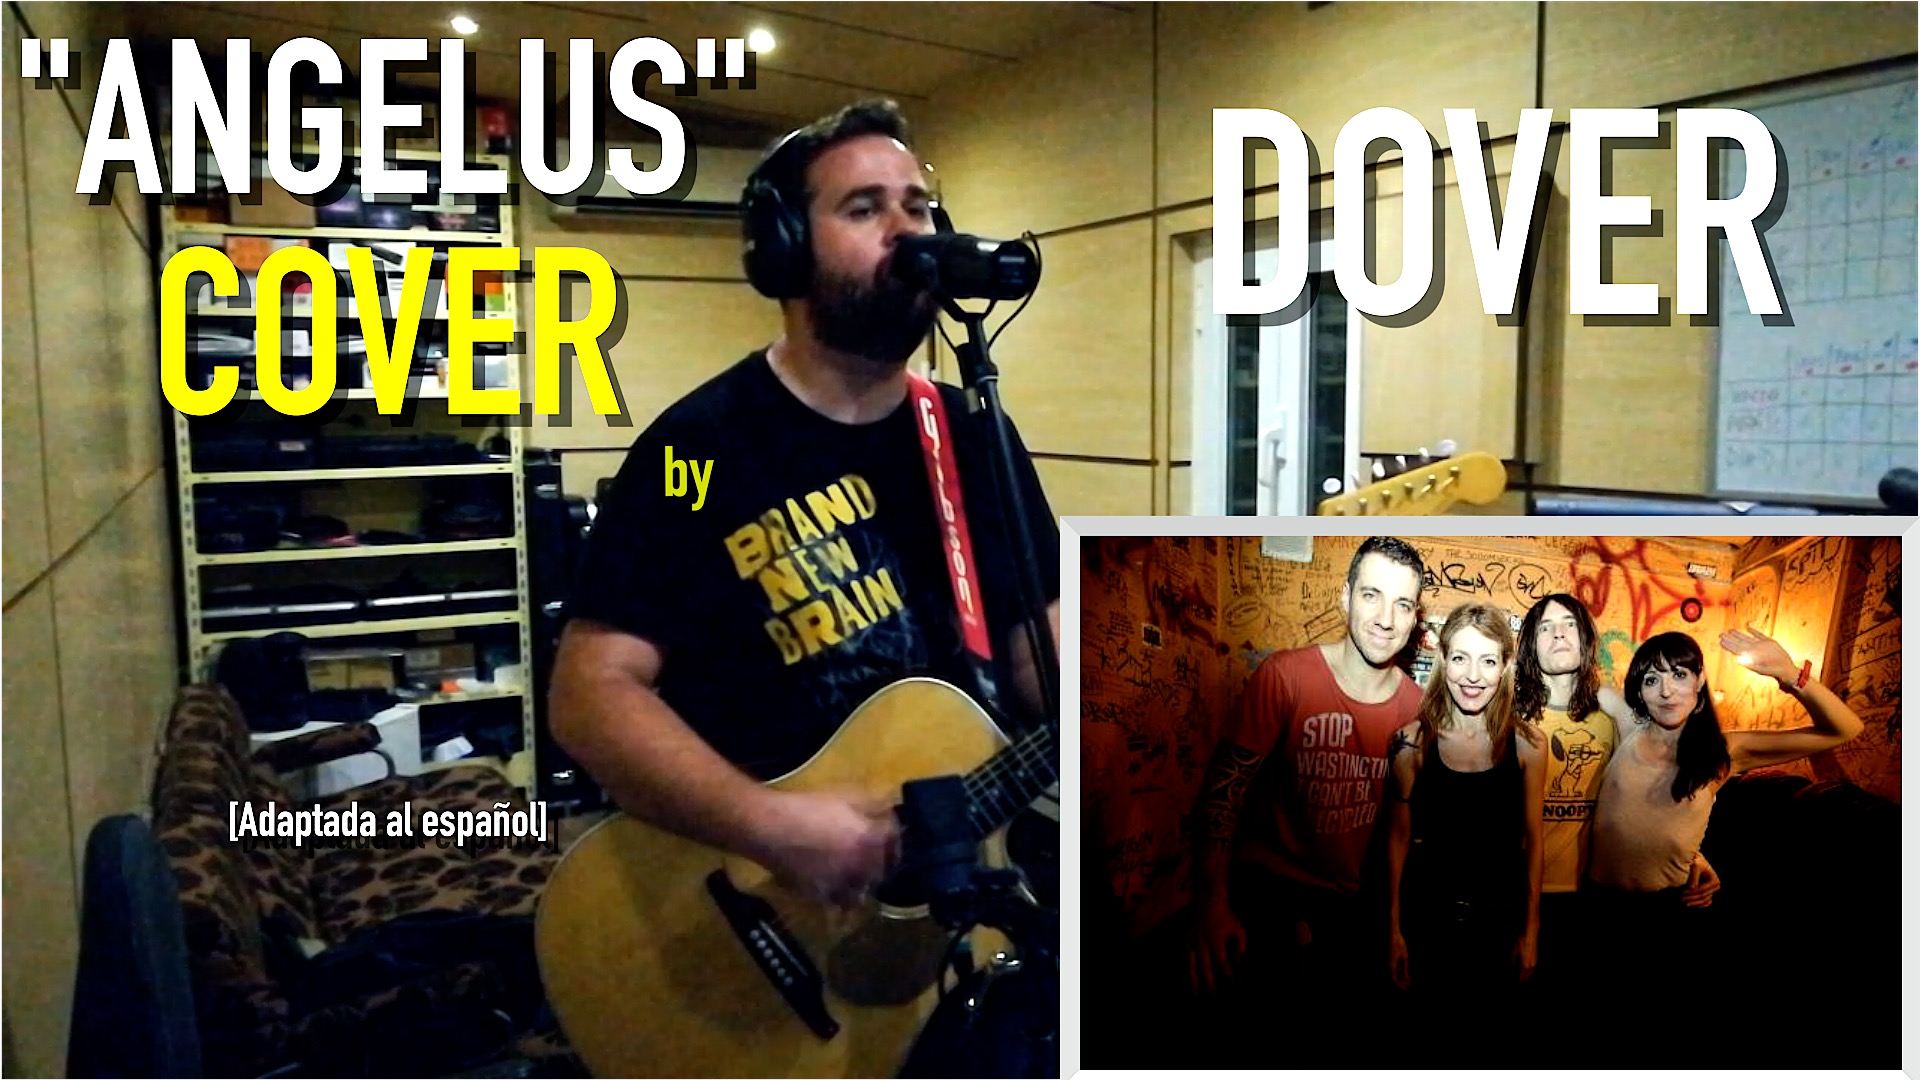 Vídeo / Dover - "Angelus" - COVER